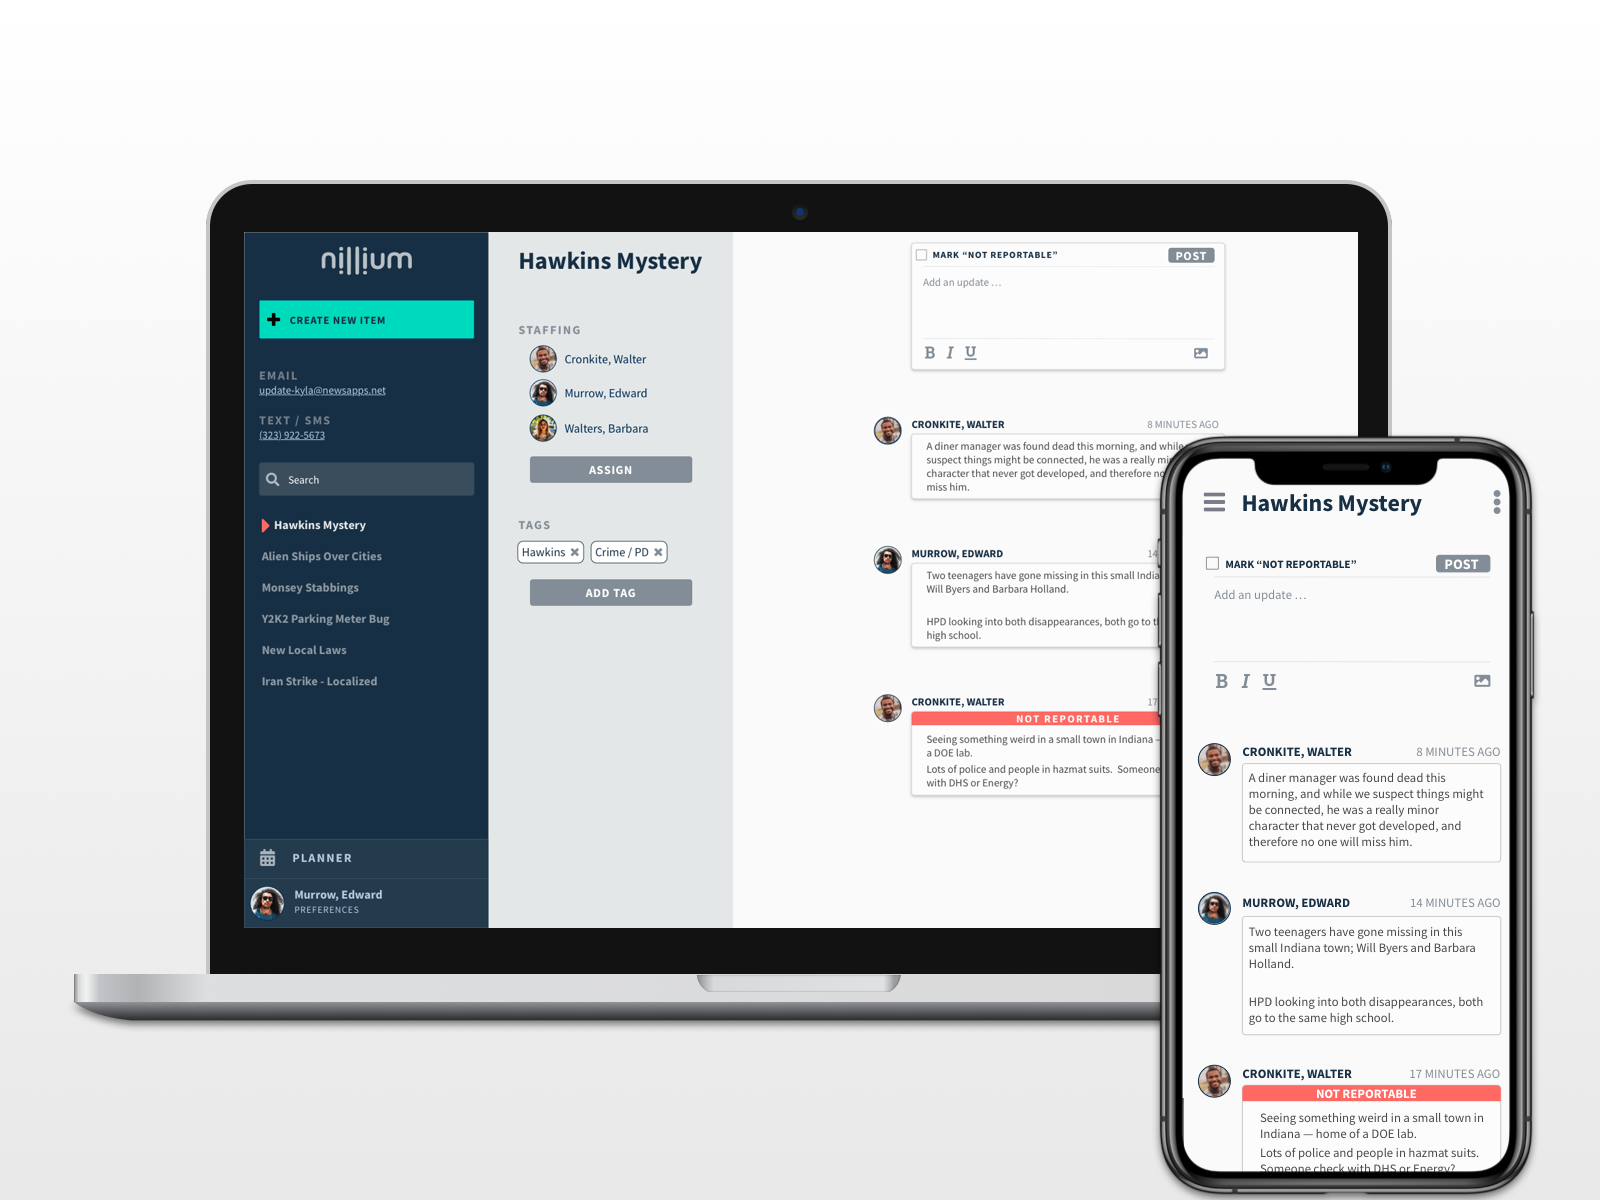 Introducing the Reporting Management System